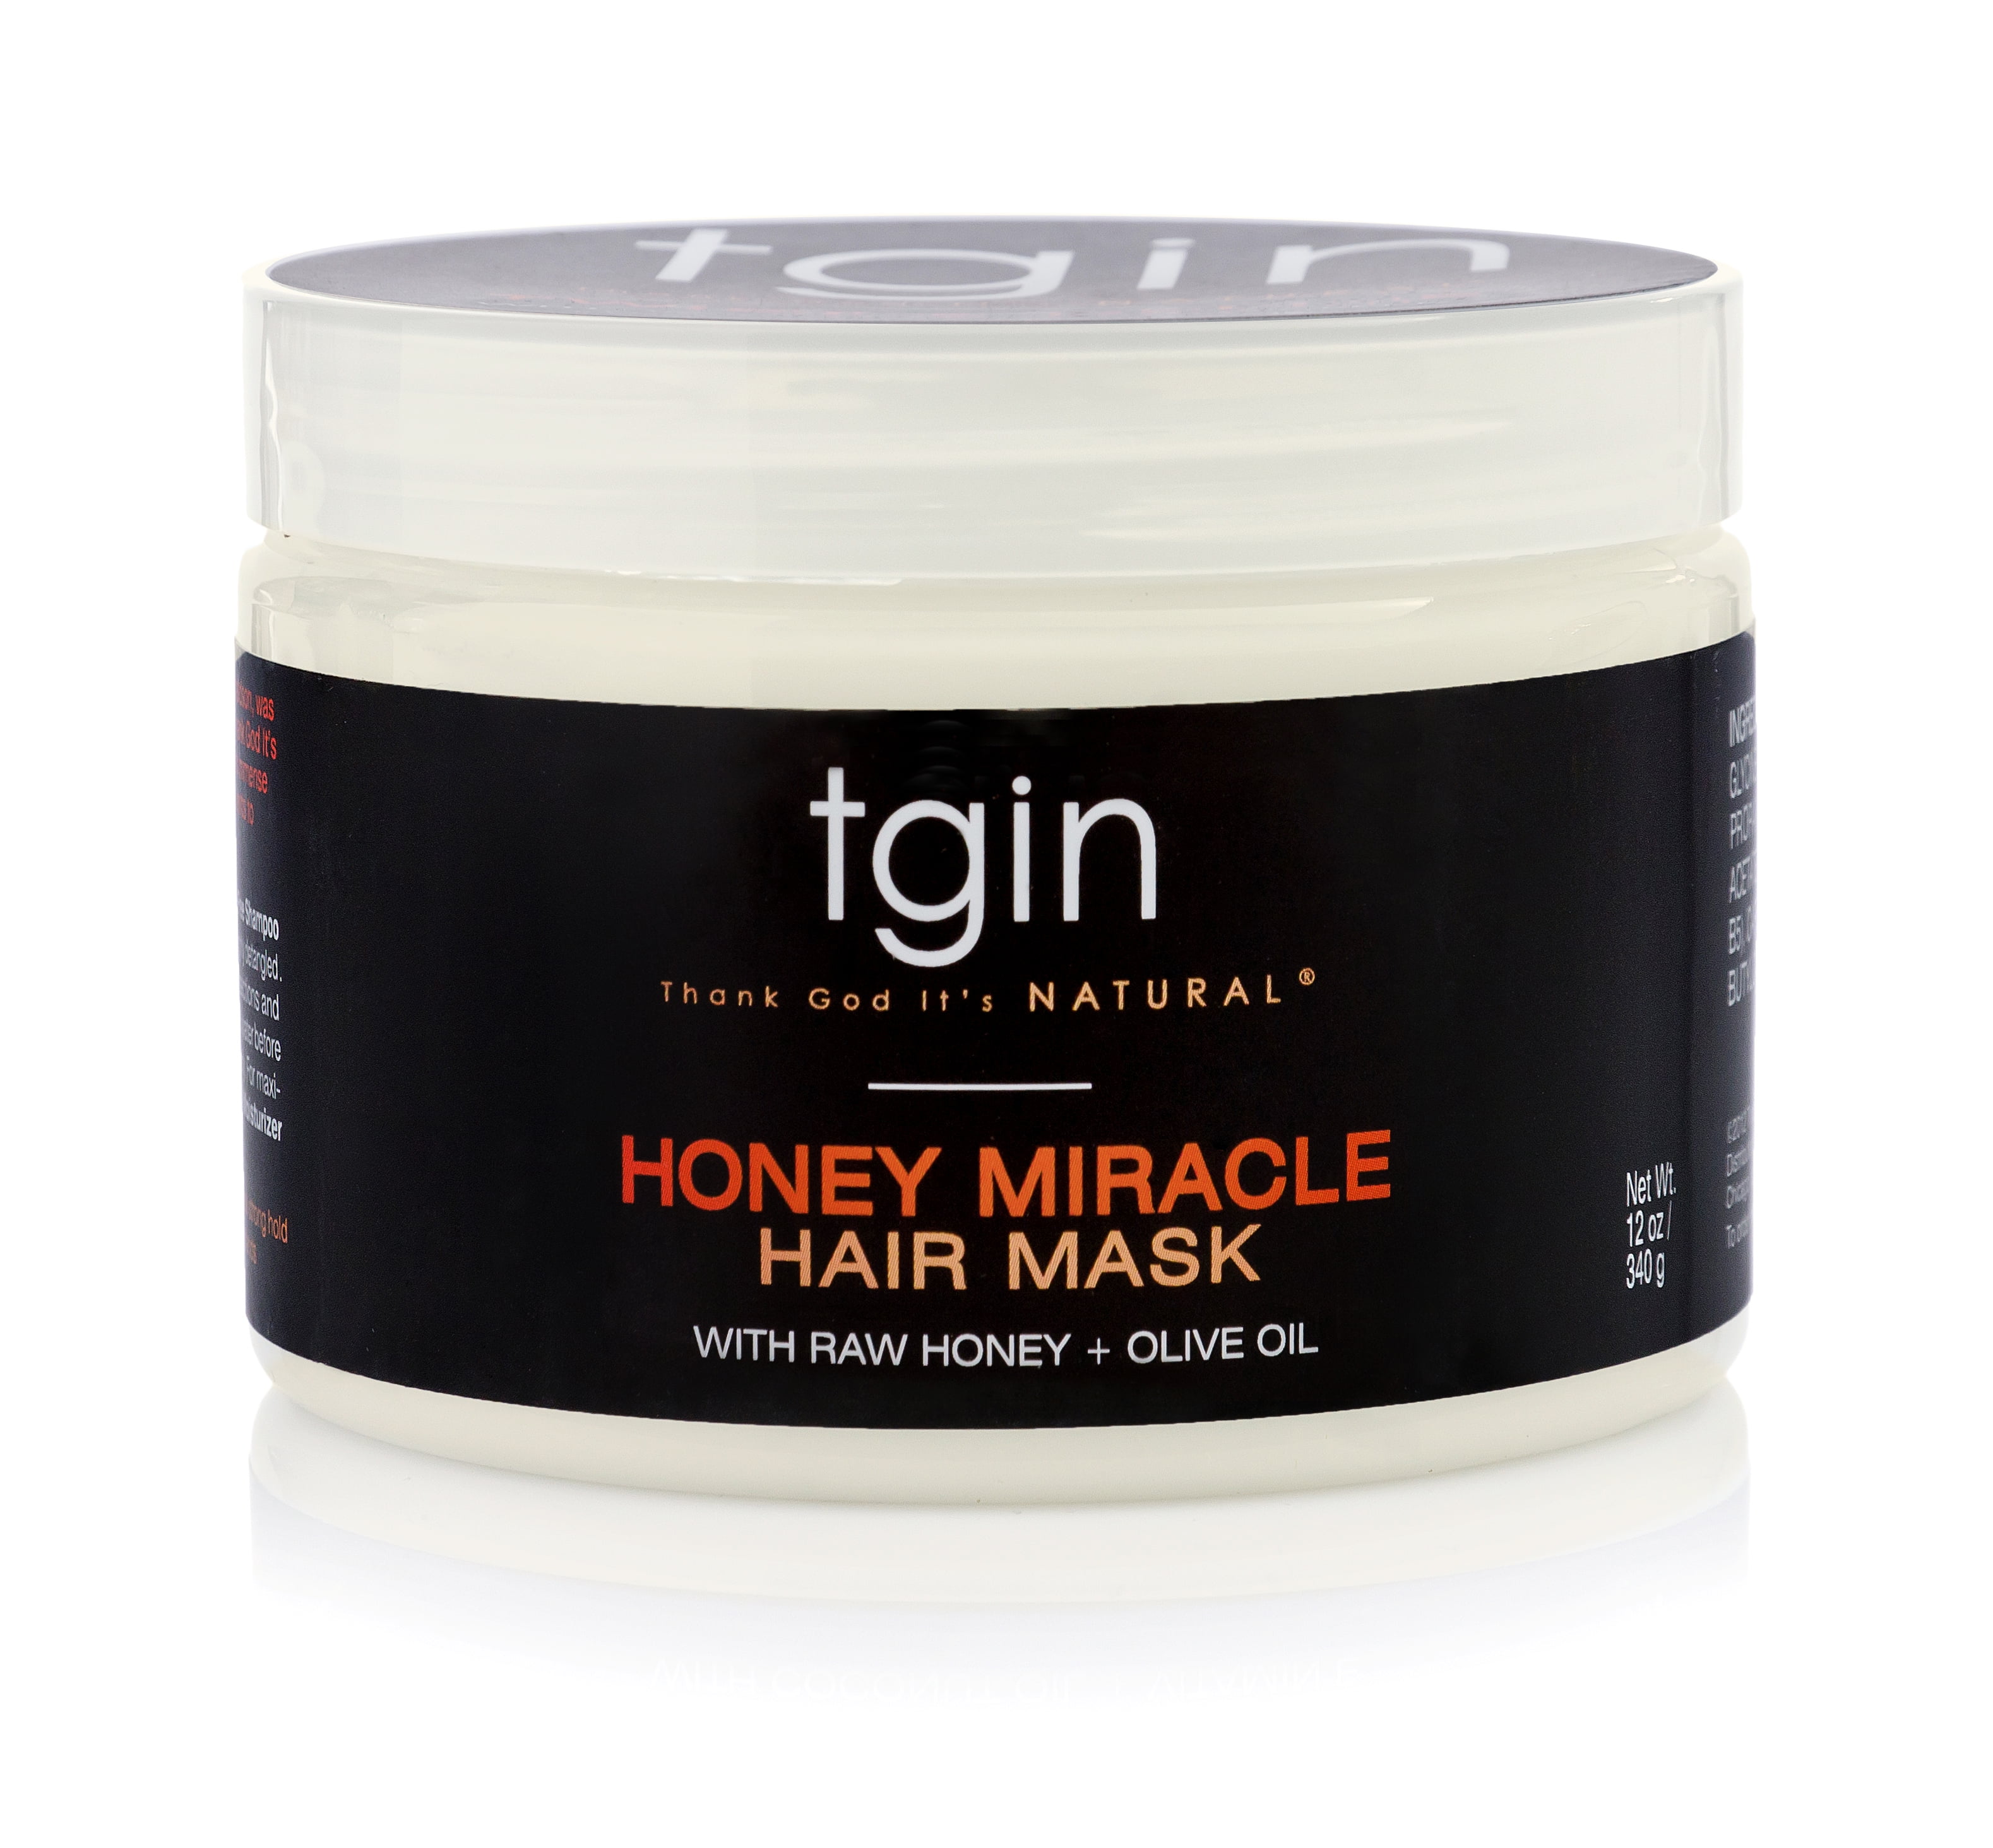 Thank God It's Natural (tgin) Moisturizing Frizz Control Hair Mask with Raw Honey & Olive Oil, 12 oz